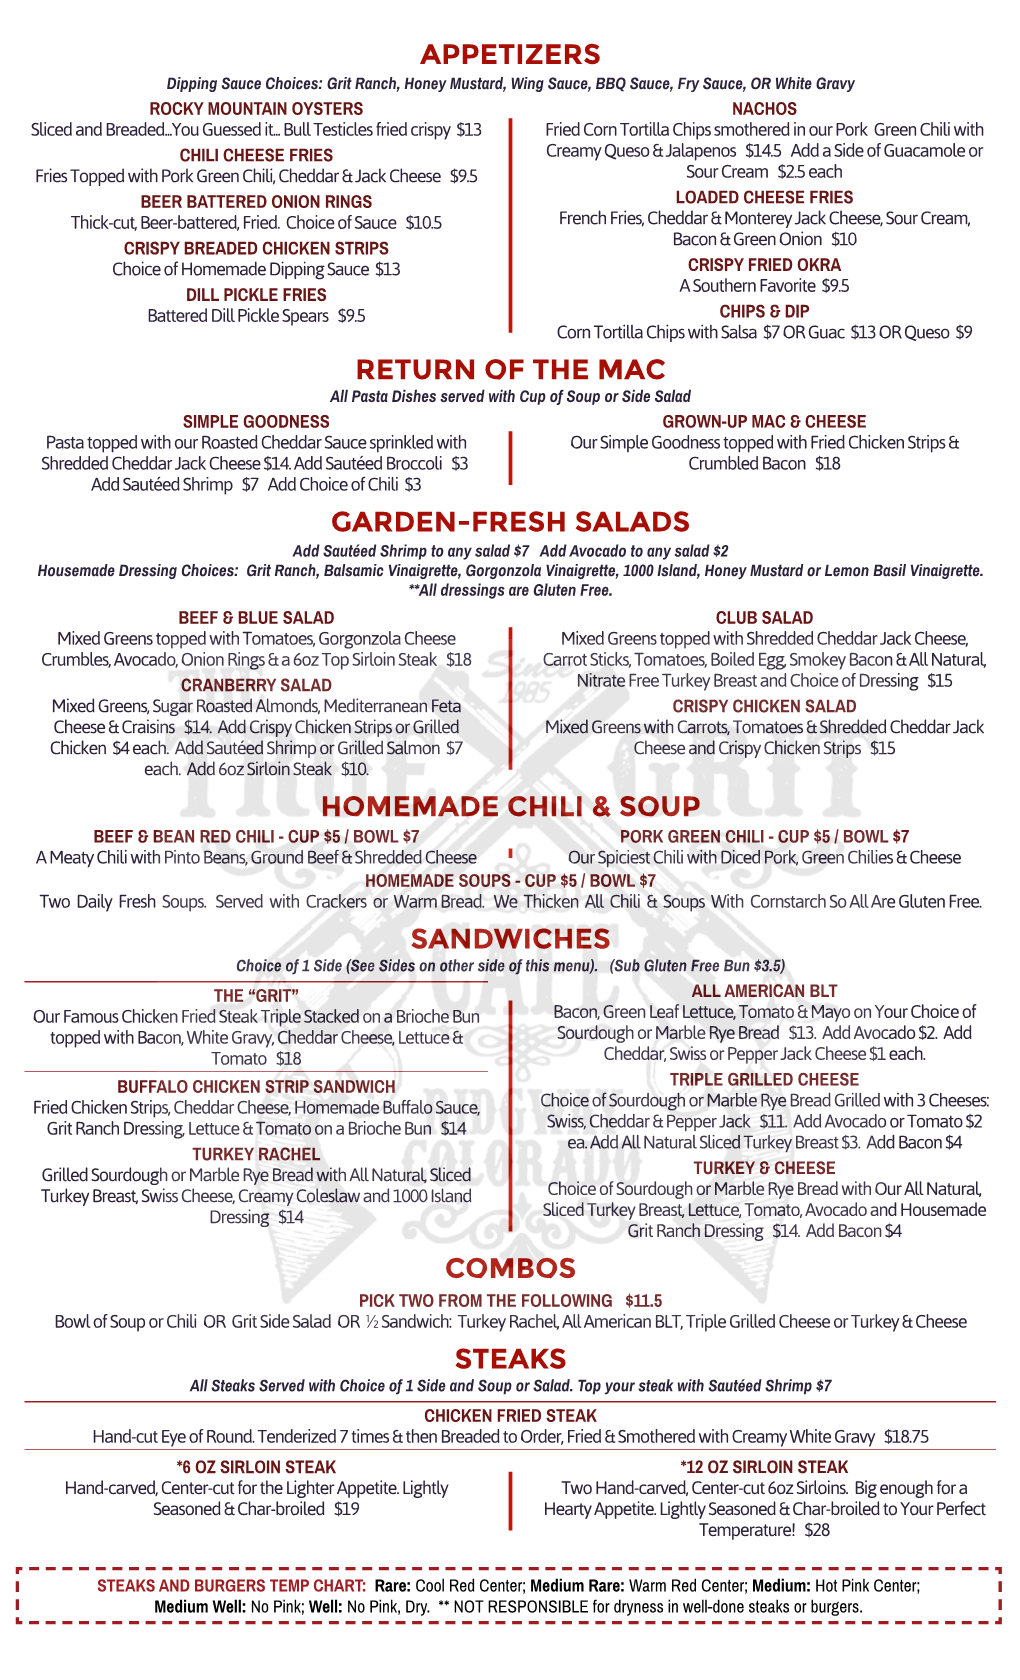 Appetizers Return of the Mac Garden-Fresh Salads Homemade Chili & Soup Sandwiches Combos Steaks